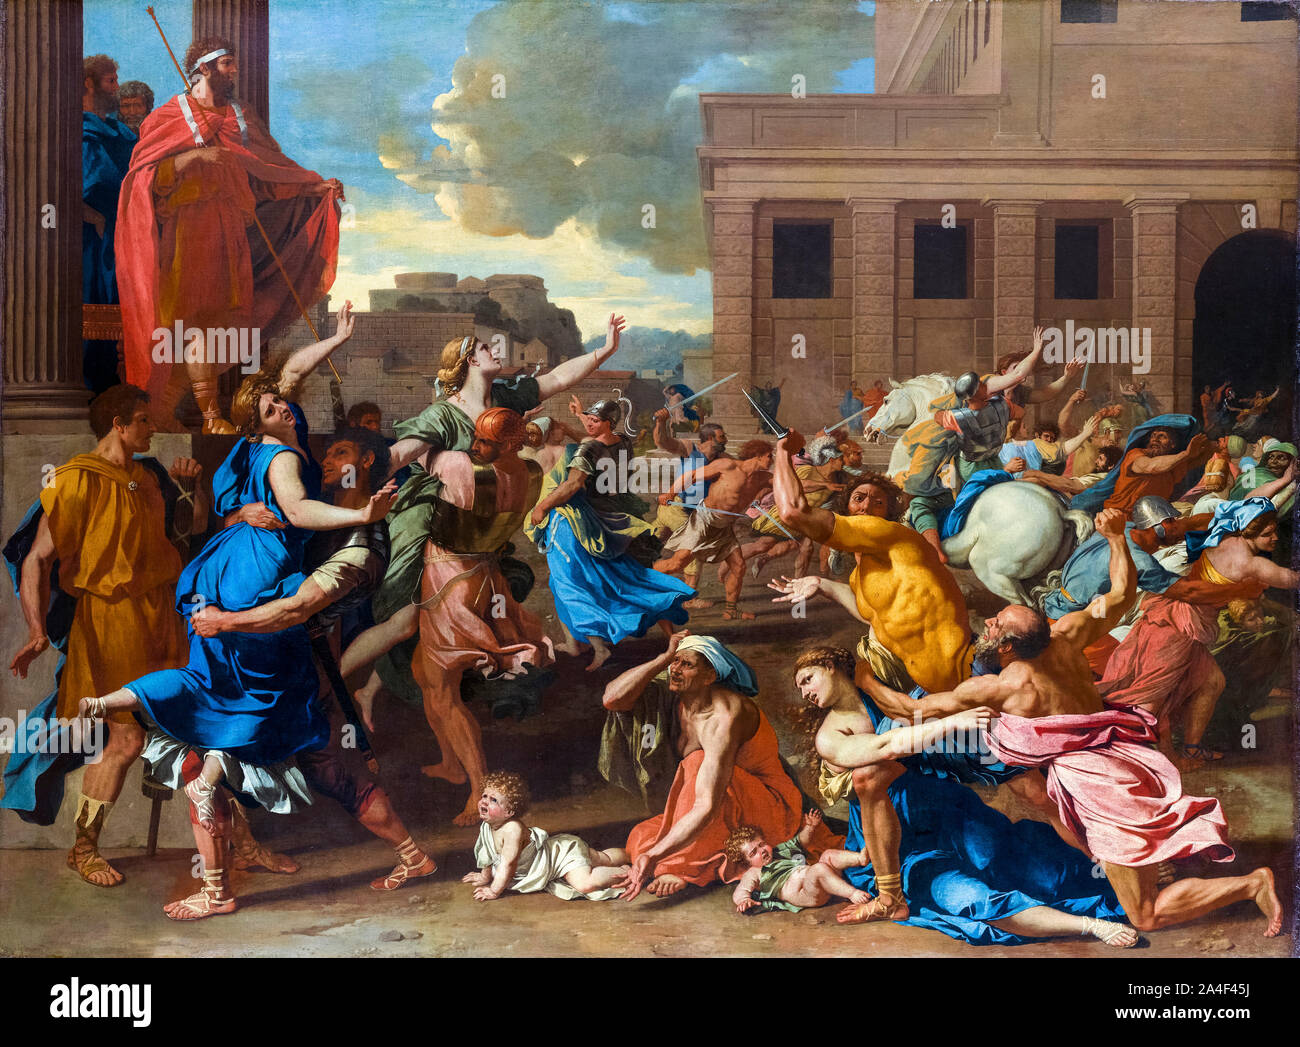 Nicolas Poussin, The Abduction of the Sabine Women, French Baroque painting, 1633-1634 Stock Photo